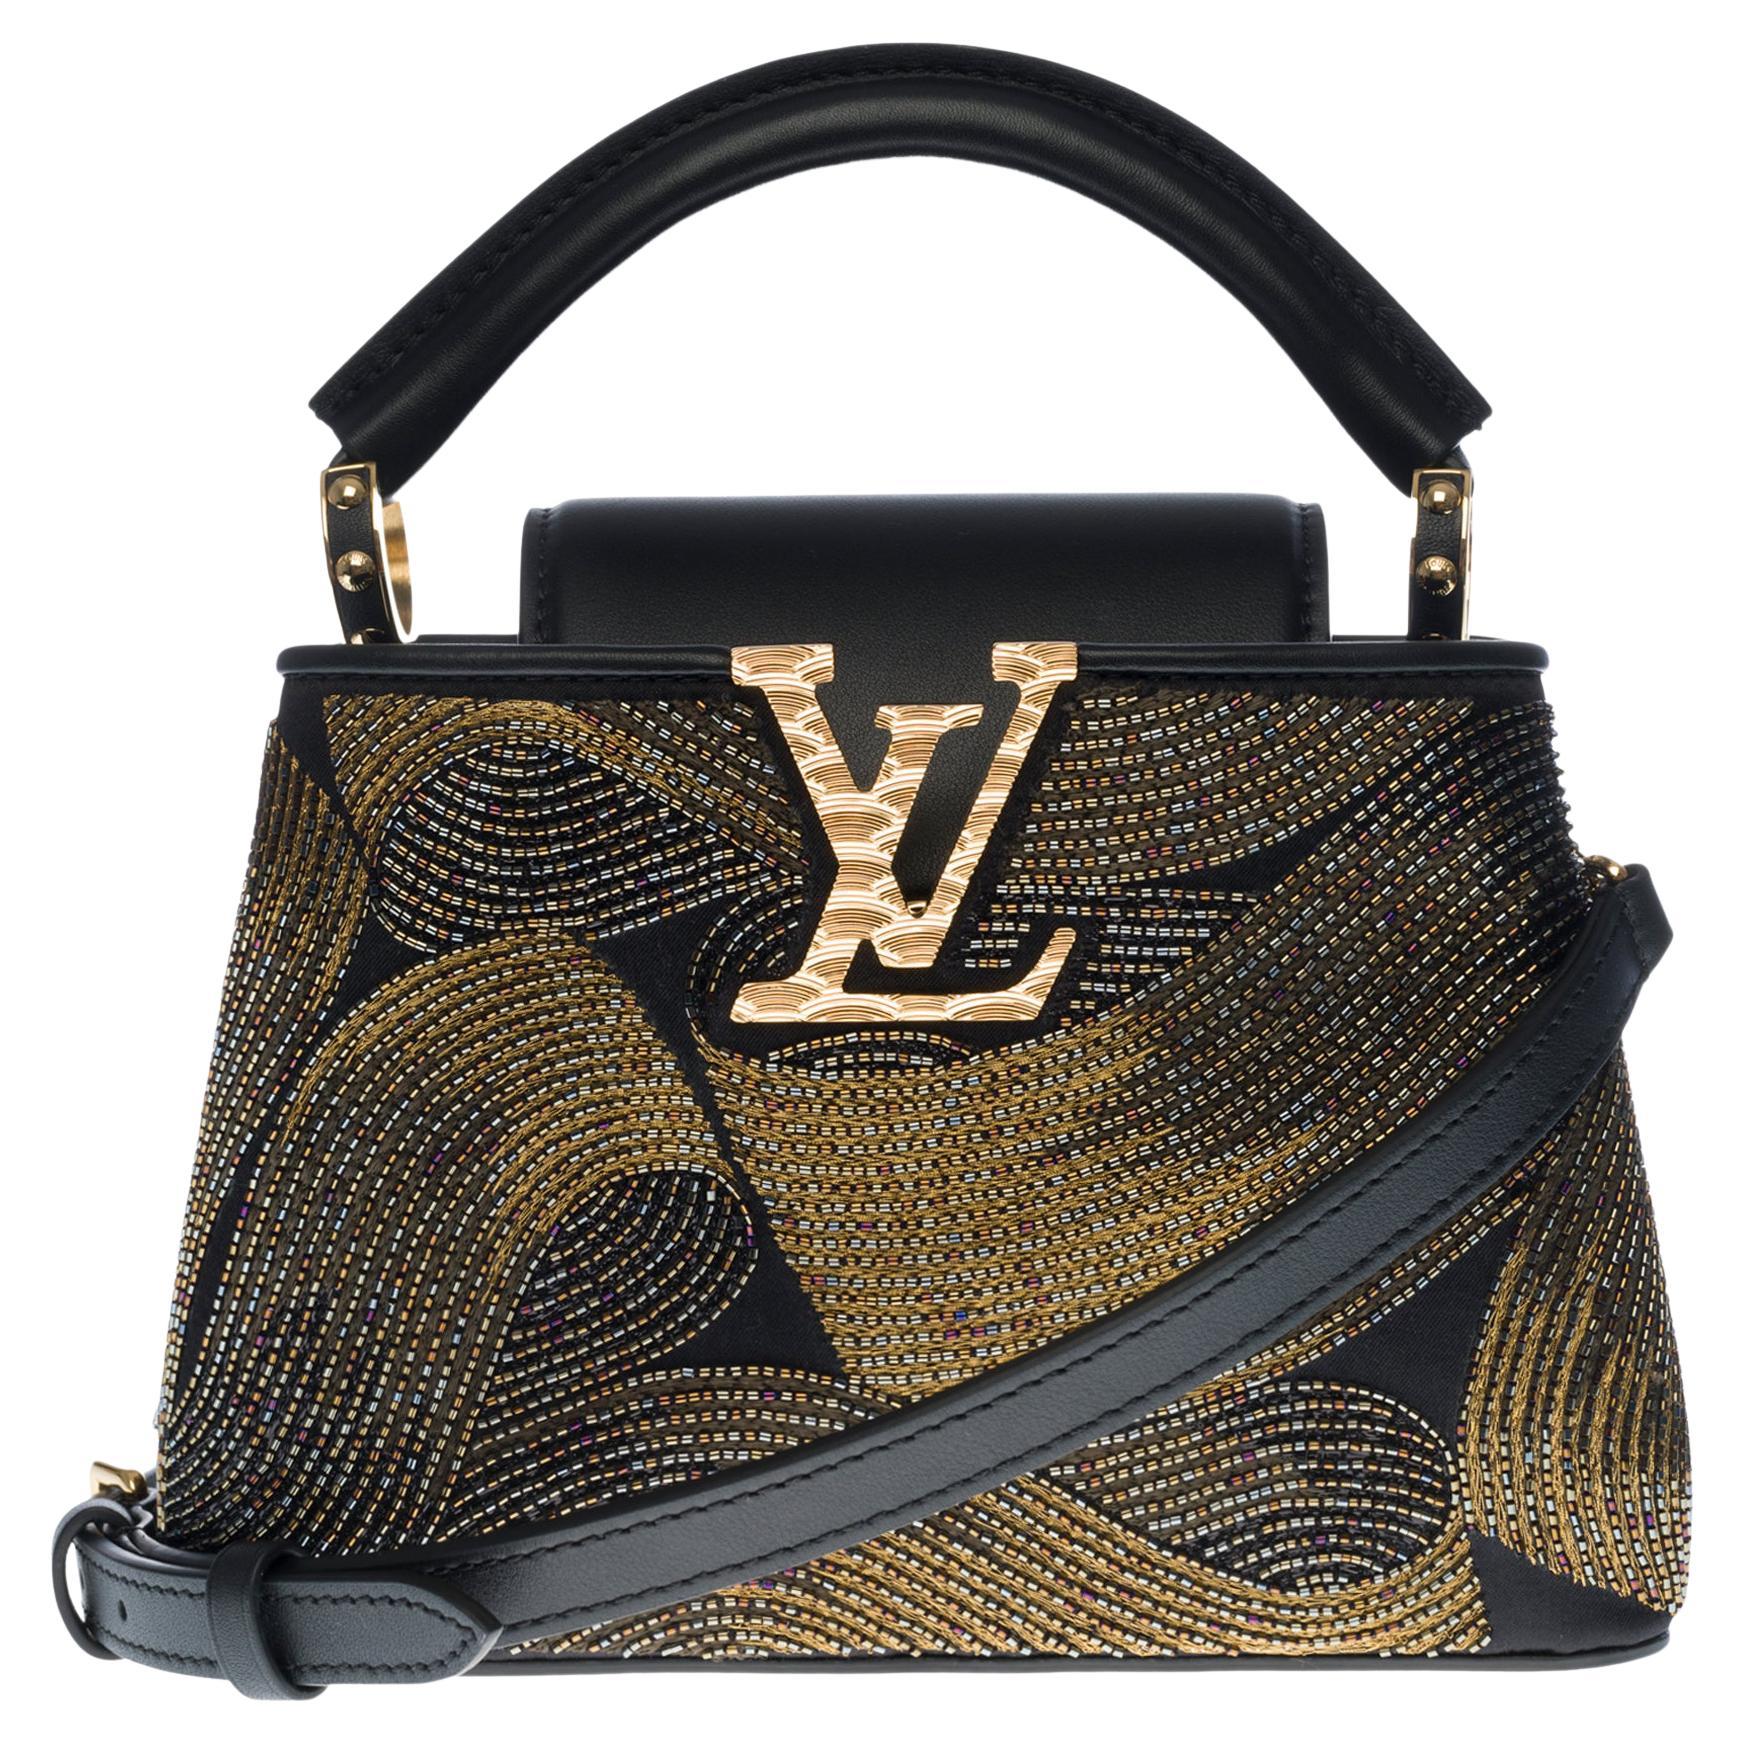 Louis Vuitton Capucines Mini handbag with strap in black and gold beads, GHW